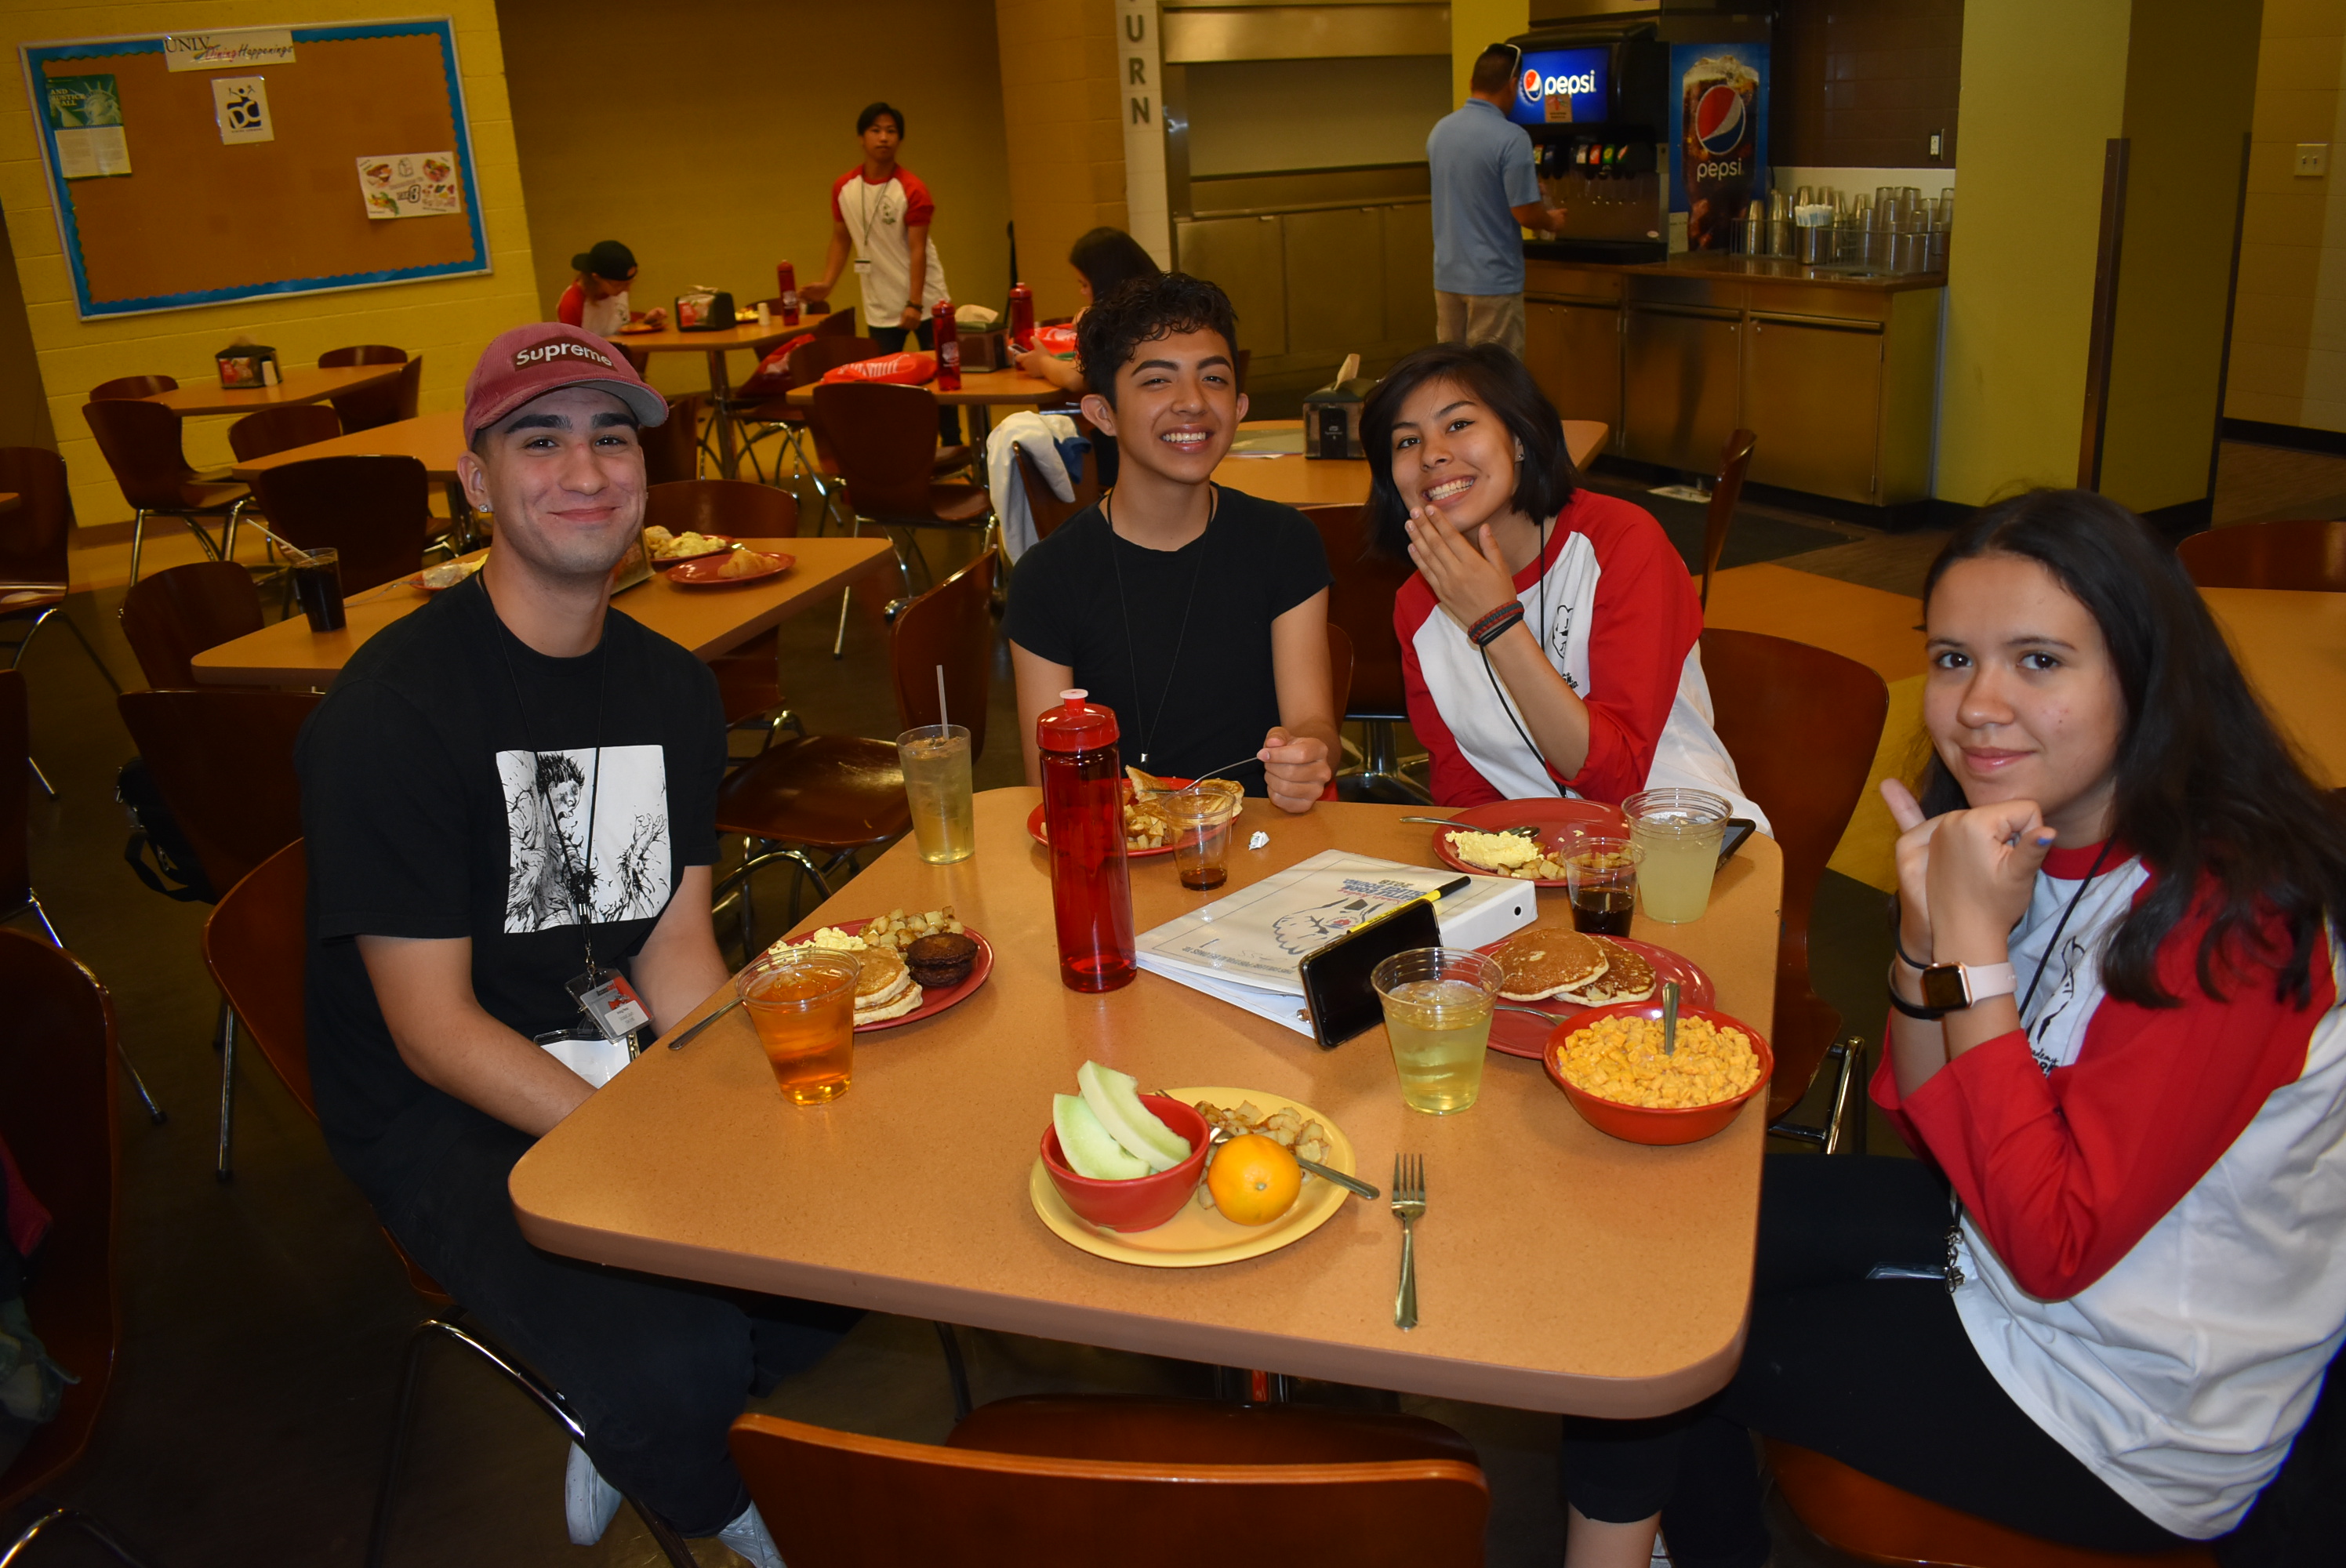 A group of young people sitting at a cafeteria table smile and pose for the camera. Two women are wearing baseball tees with red sleeves, and two men wear black shirts